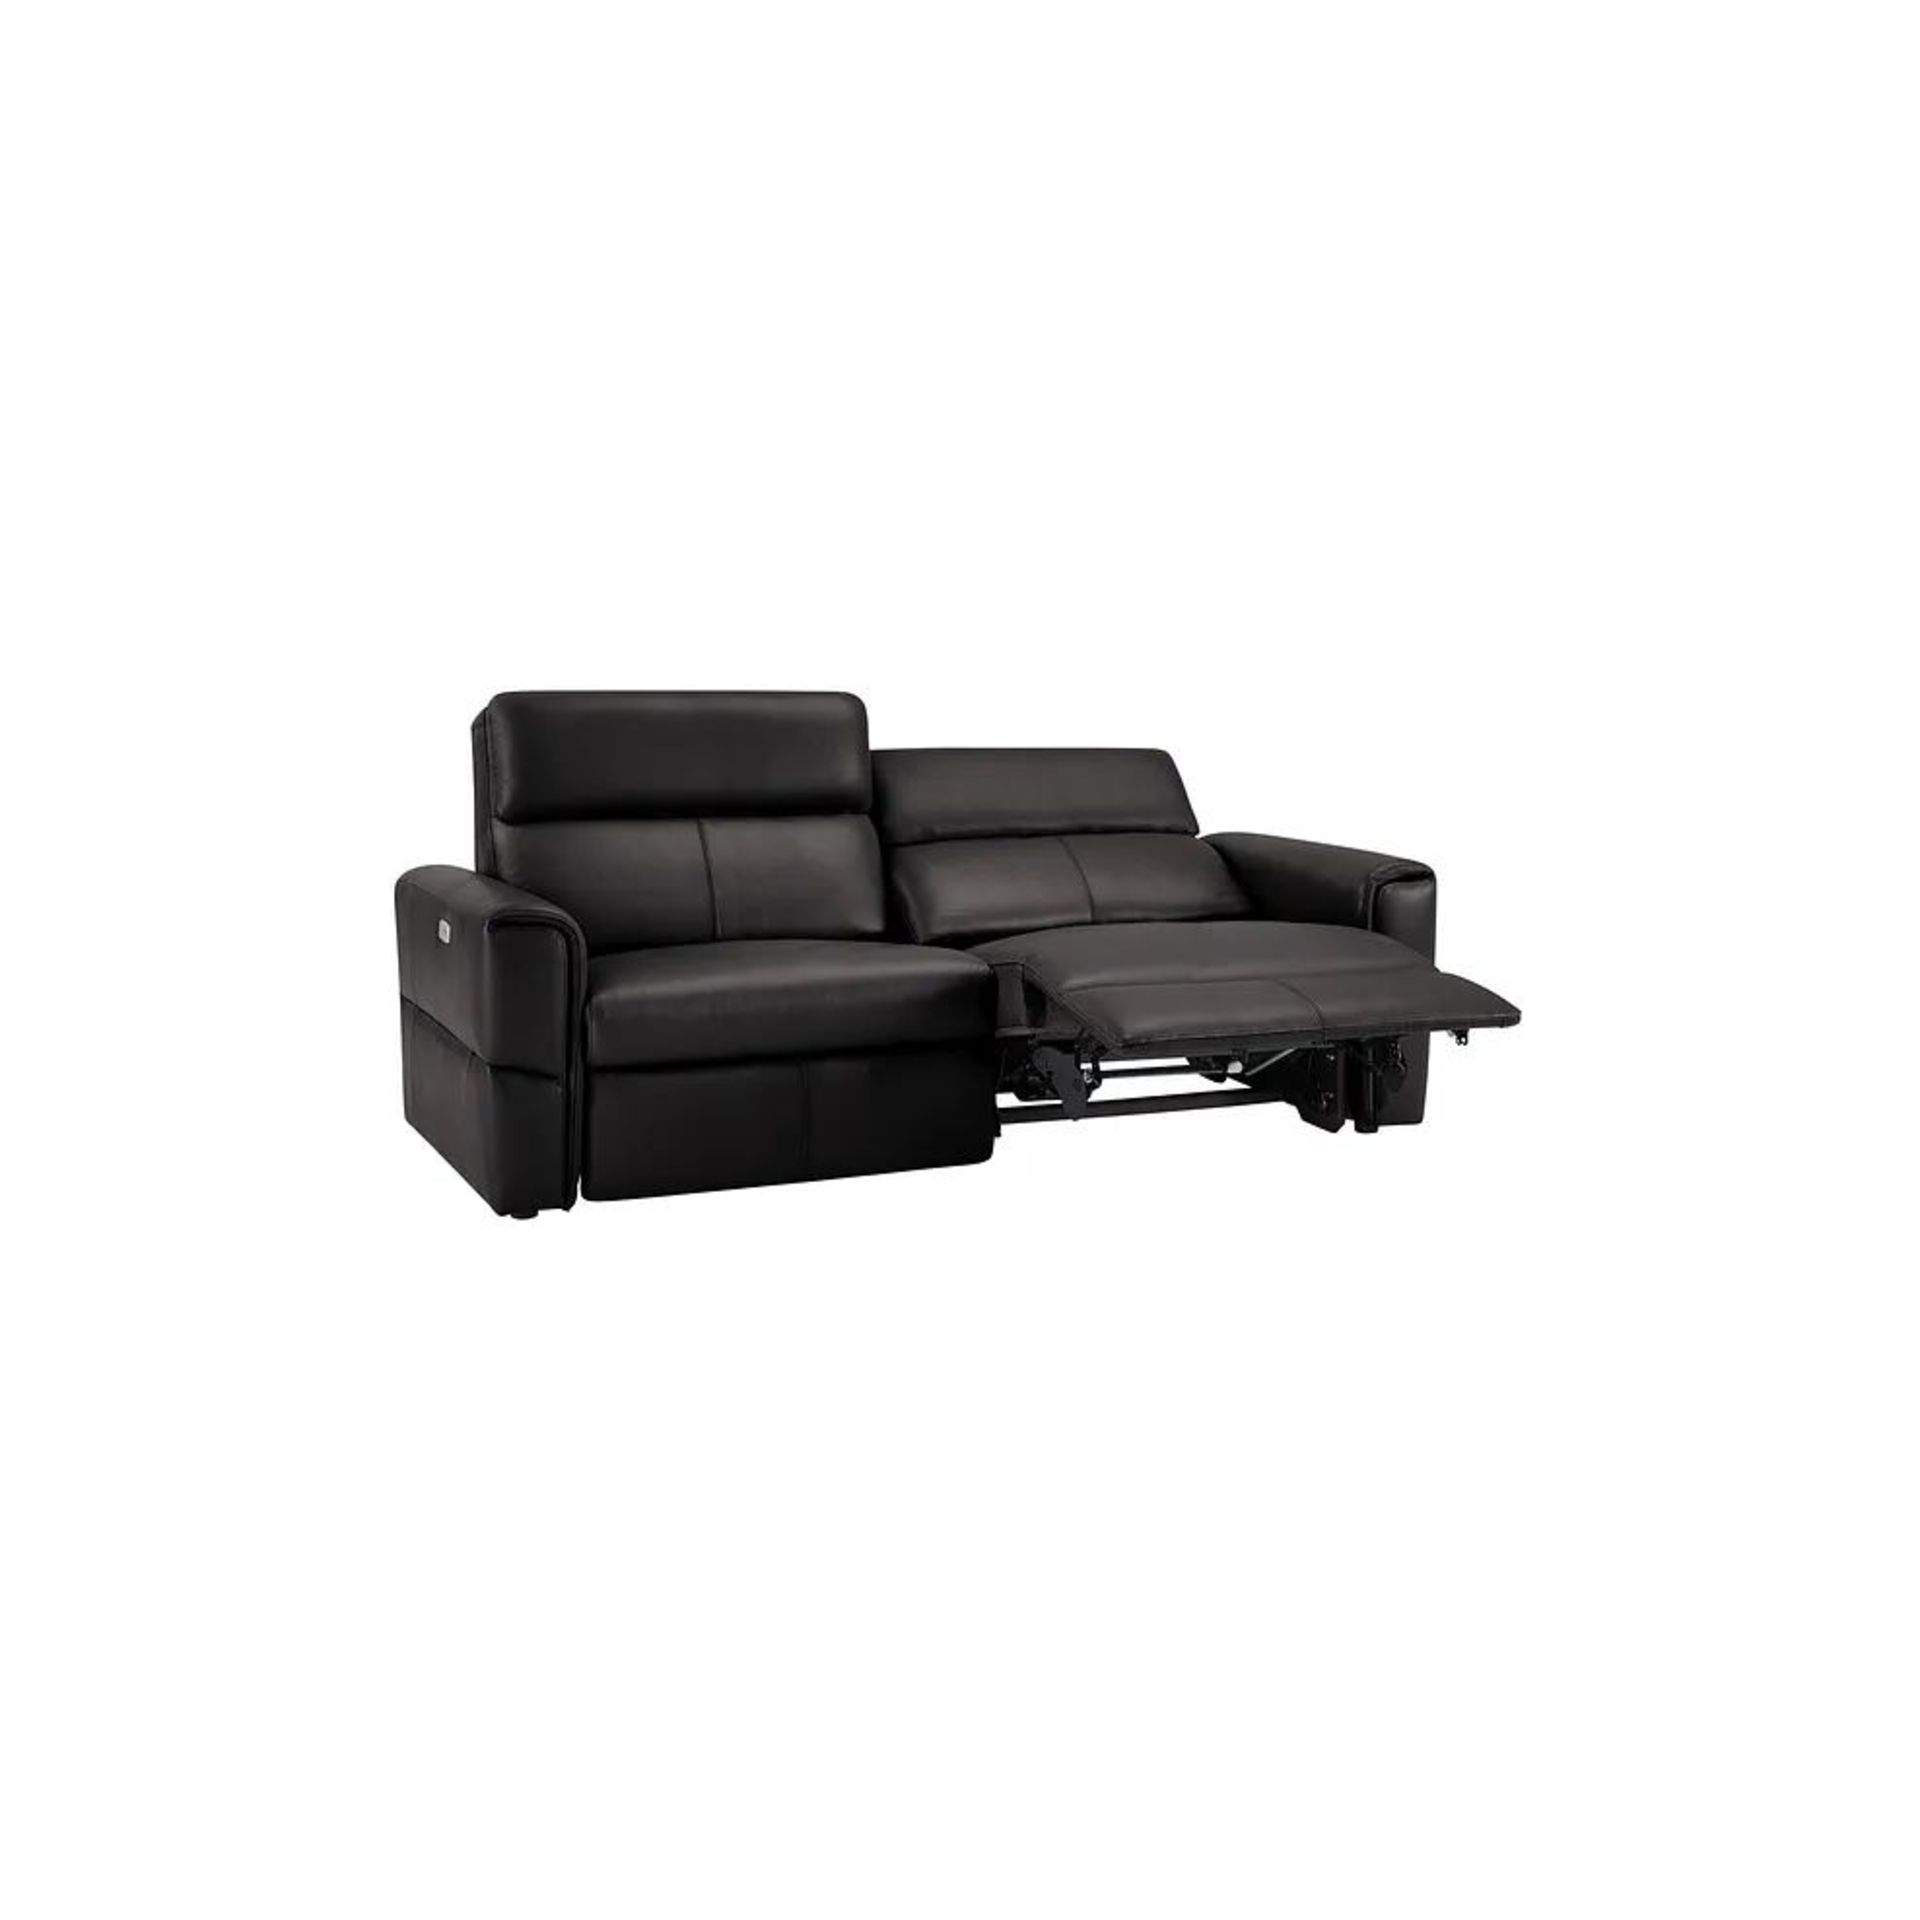 BRAND NEW SAMSON 3 Seater Electric Recliner Sofa - BLACK LEATHER. RRP £1779. Showcasing neat, modern - Image 5 of 8